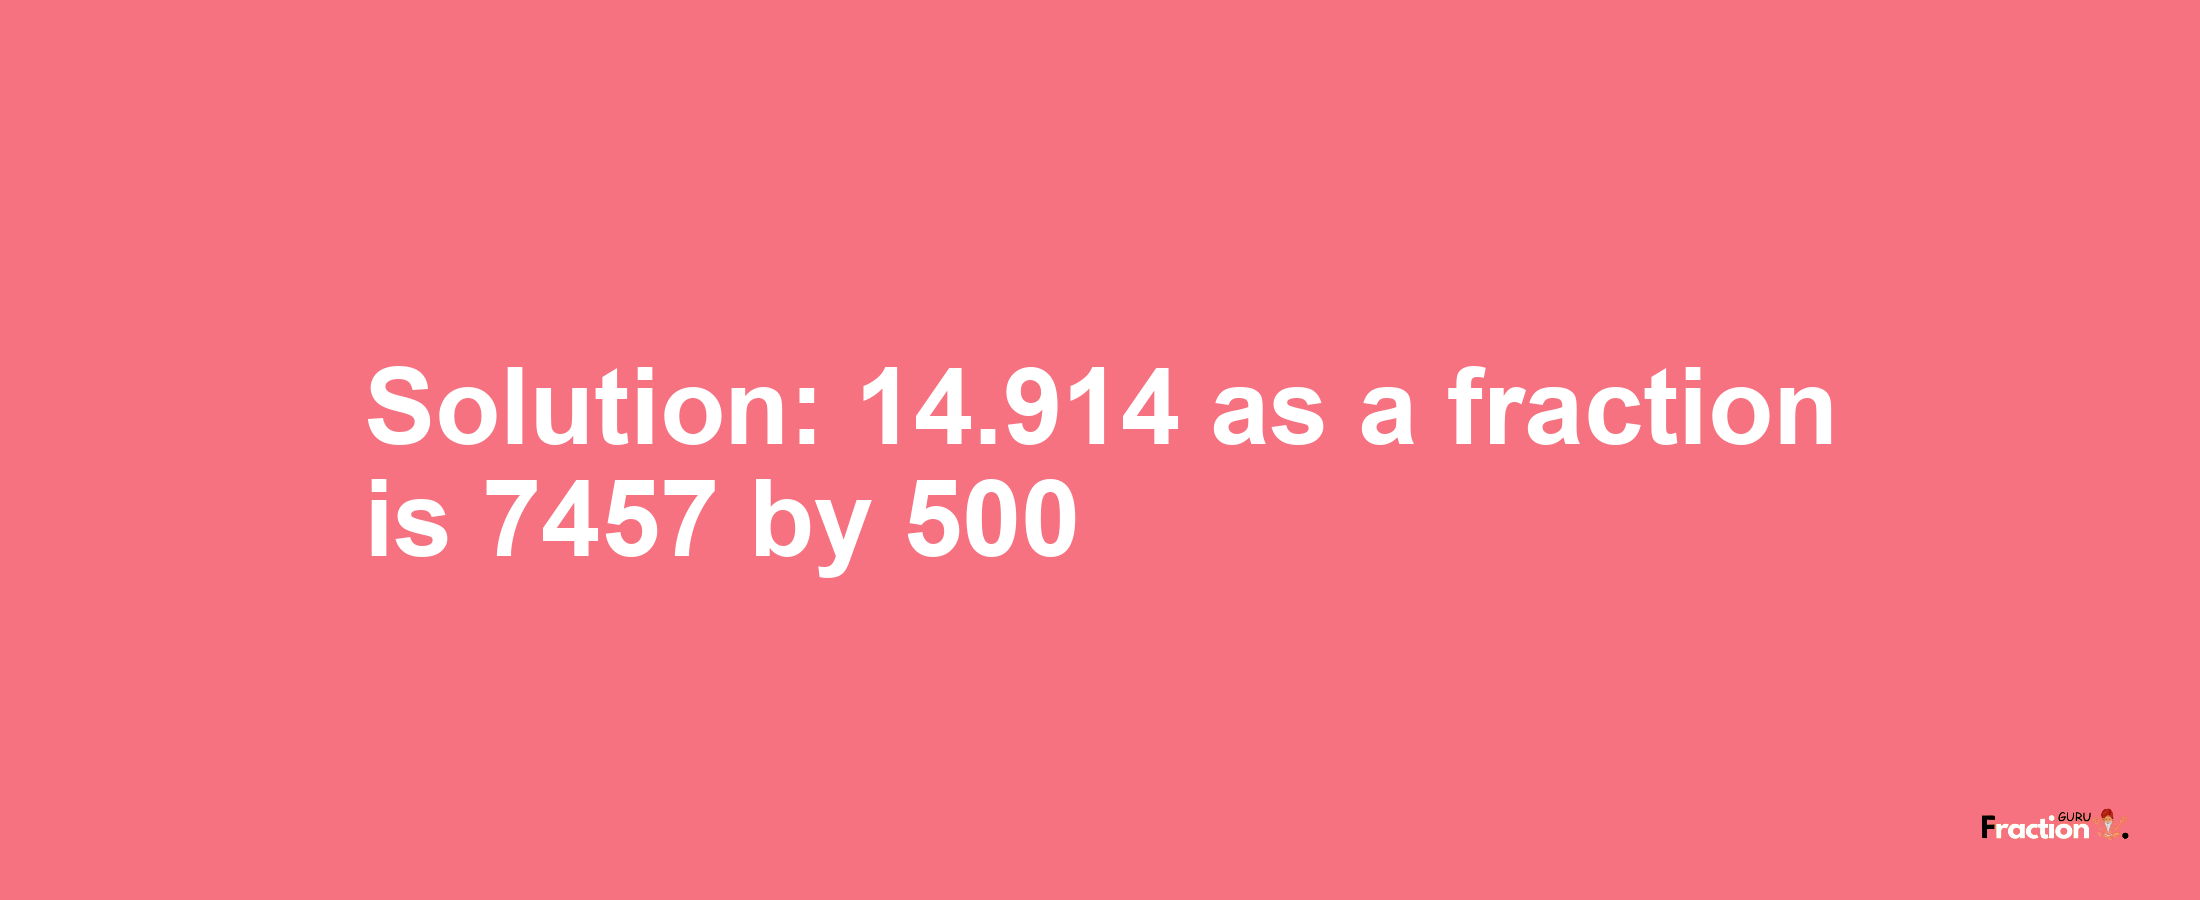 Solution:14.914 as a fraction is 7457/500